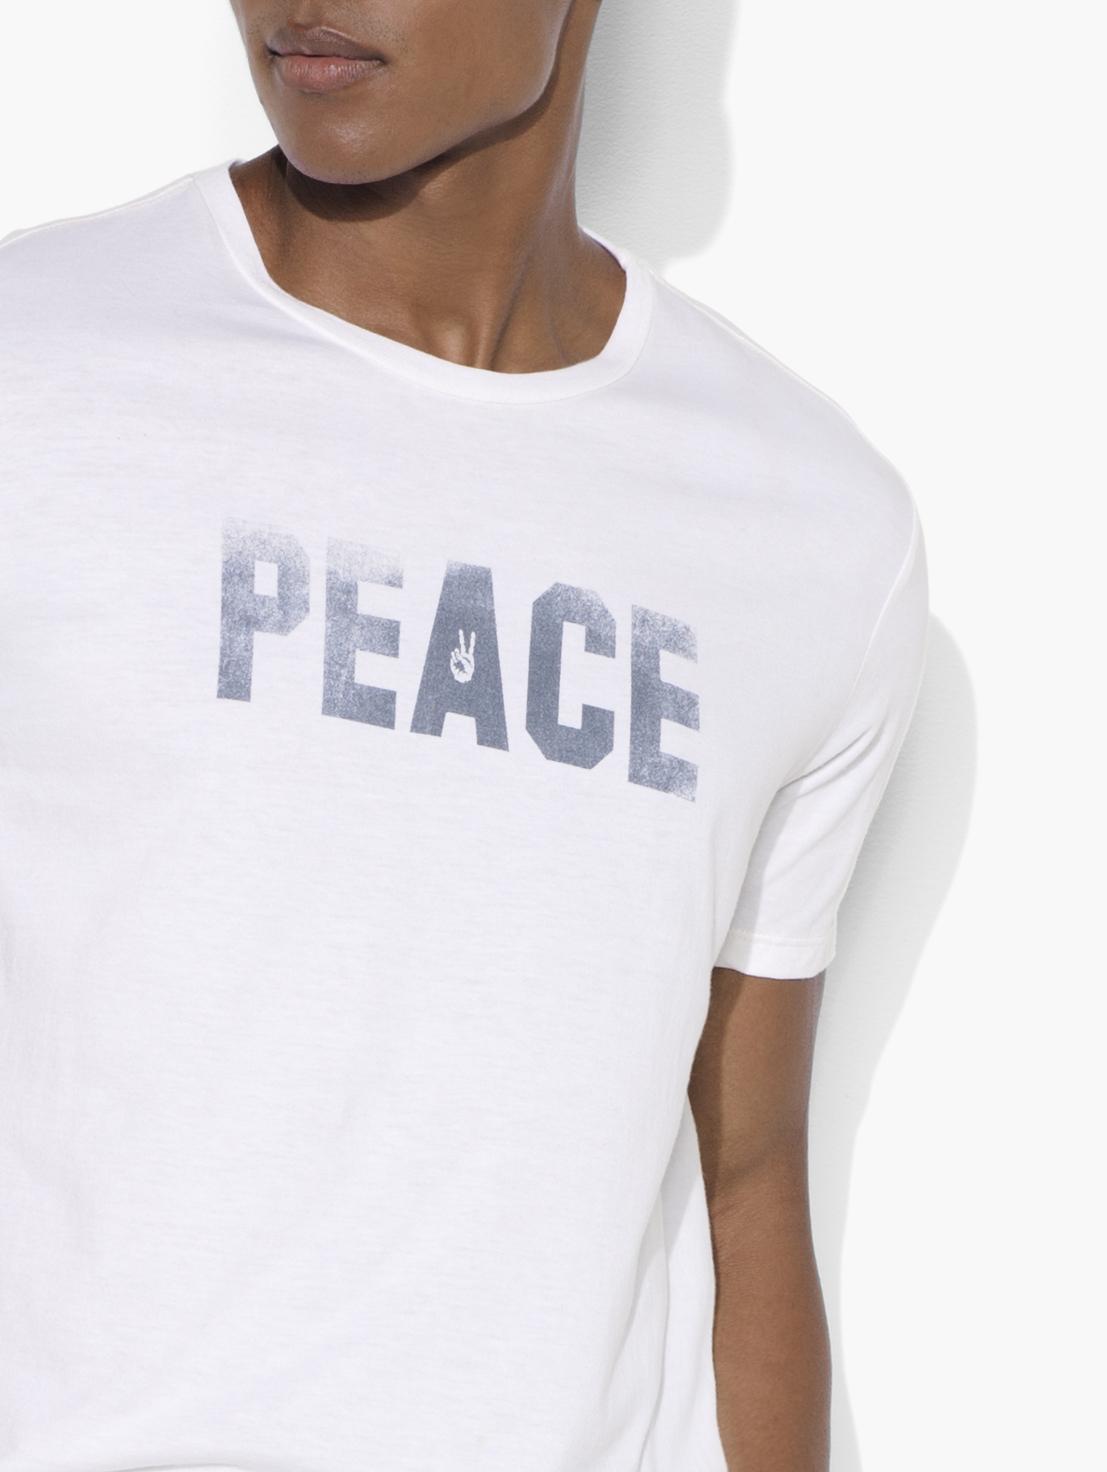 Peace & Freedom Graphic Tee image number 3